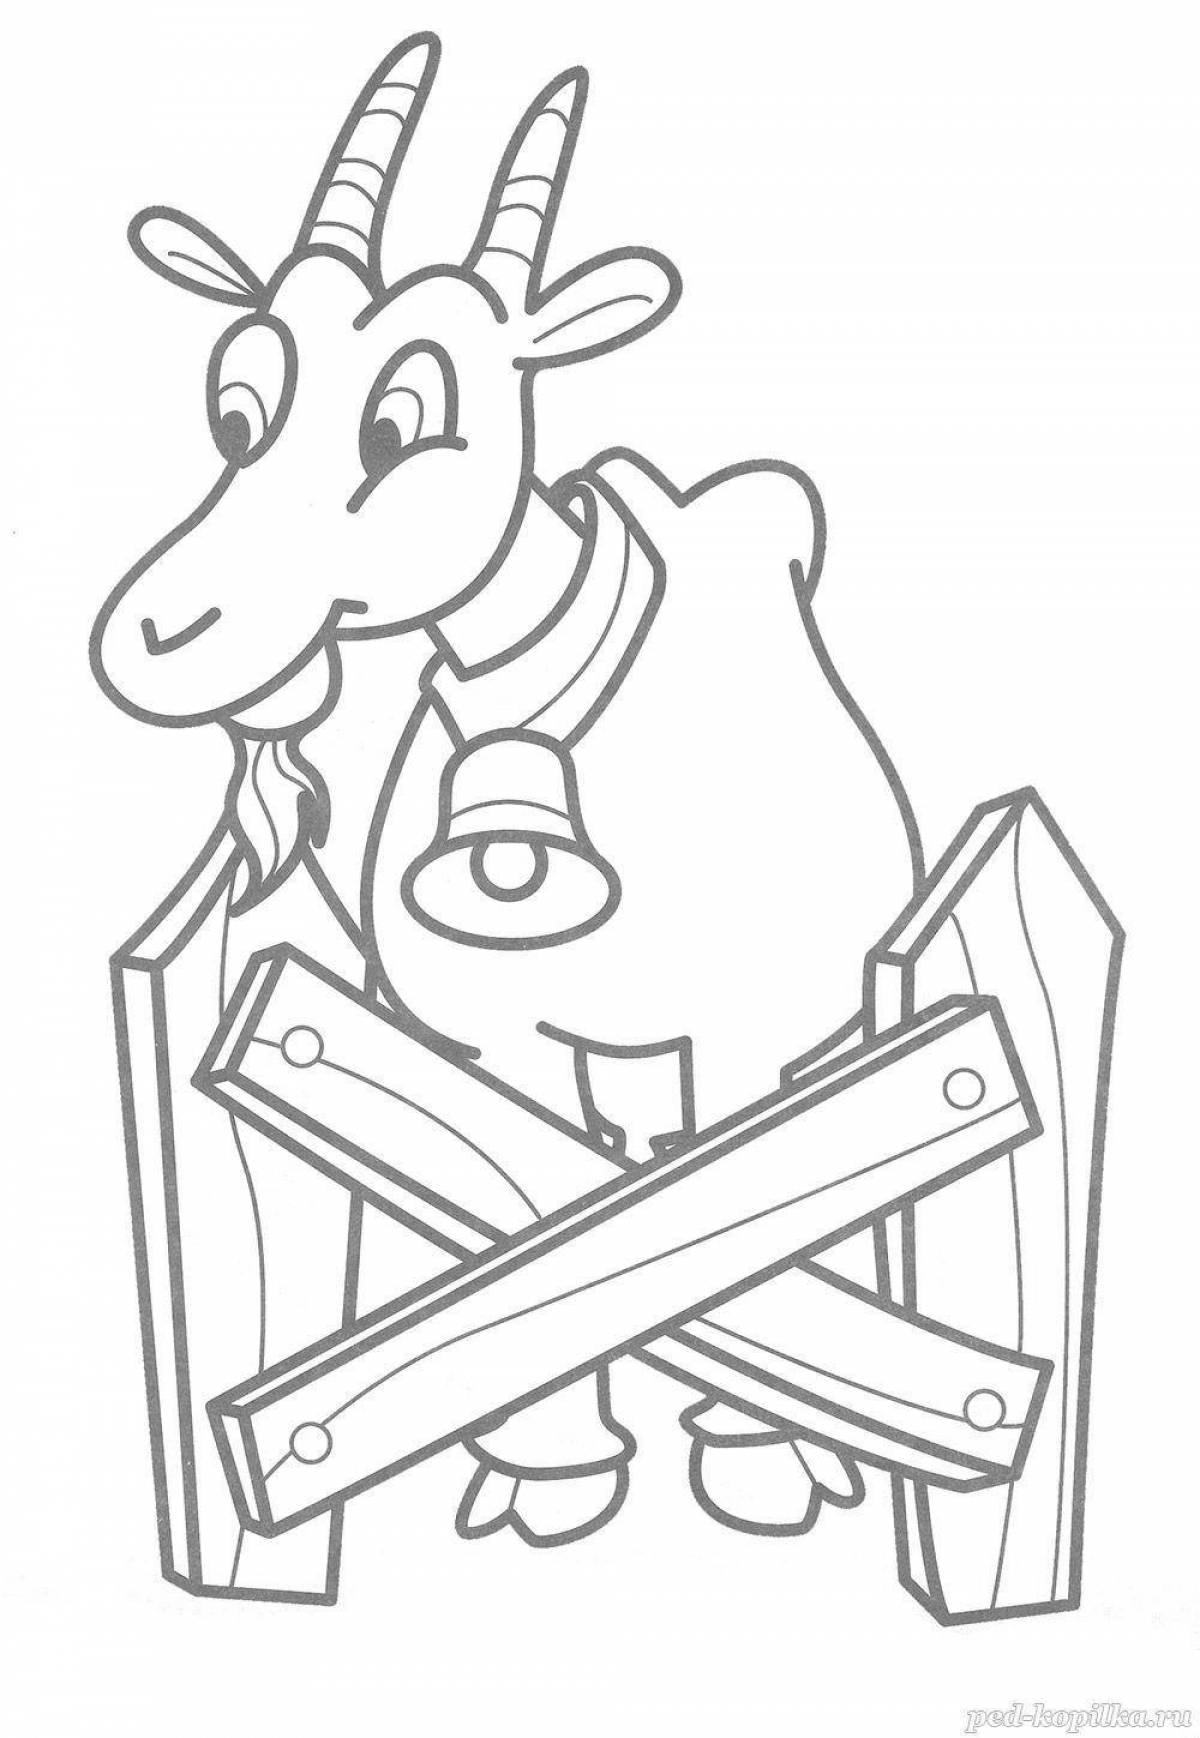 Charming goat dereza coloring book